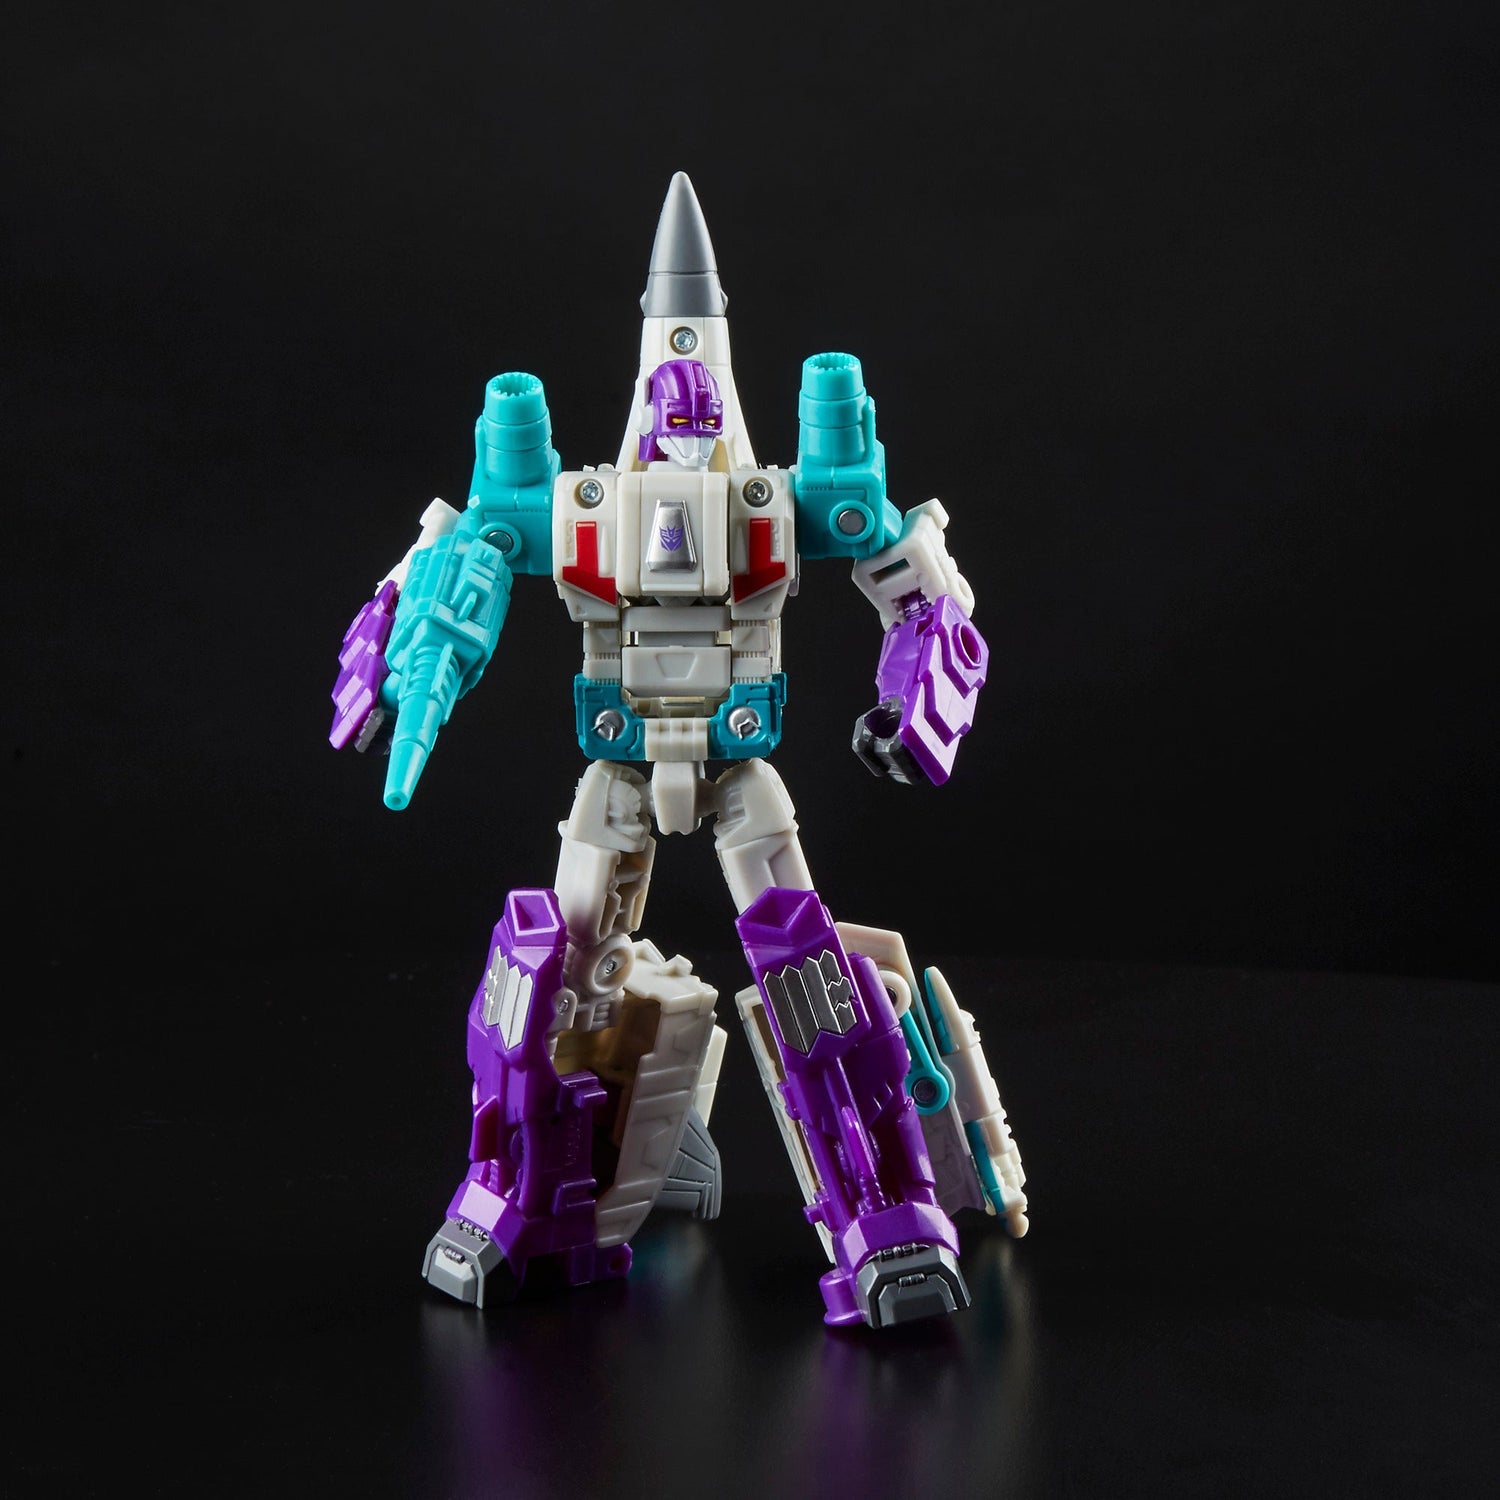 Transformers: Generations Power of the Primes Deluxe Class Dreadwind Figure